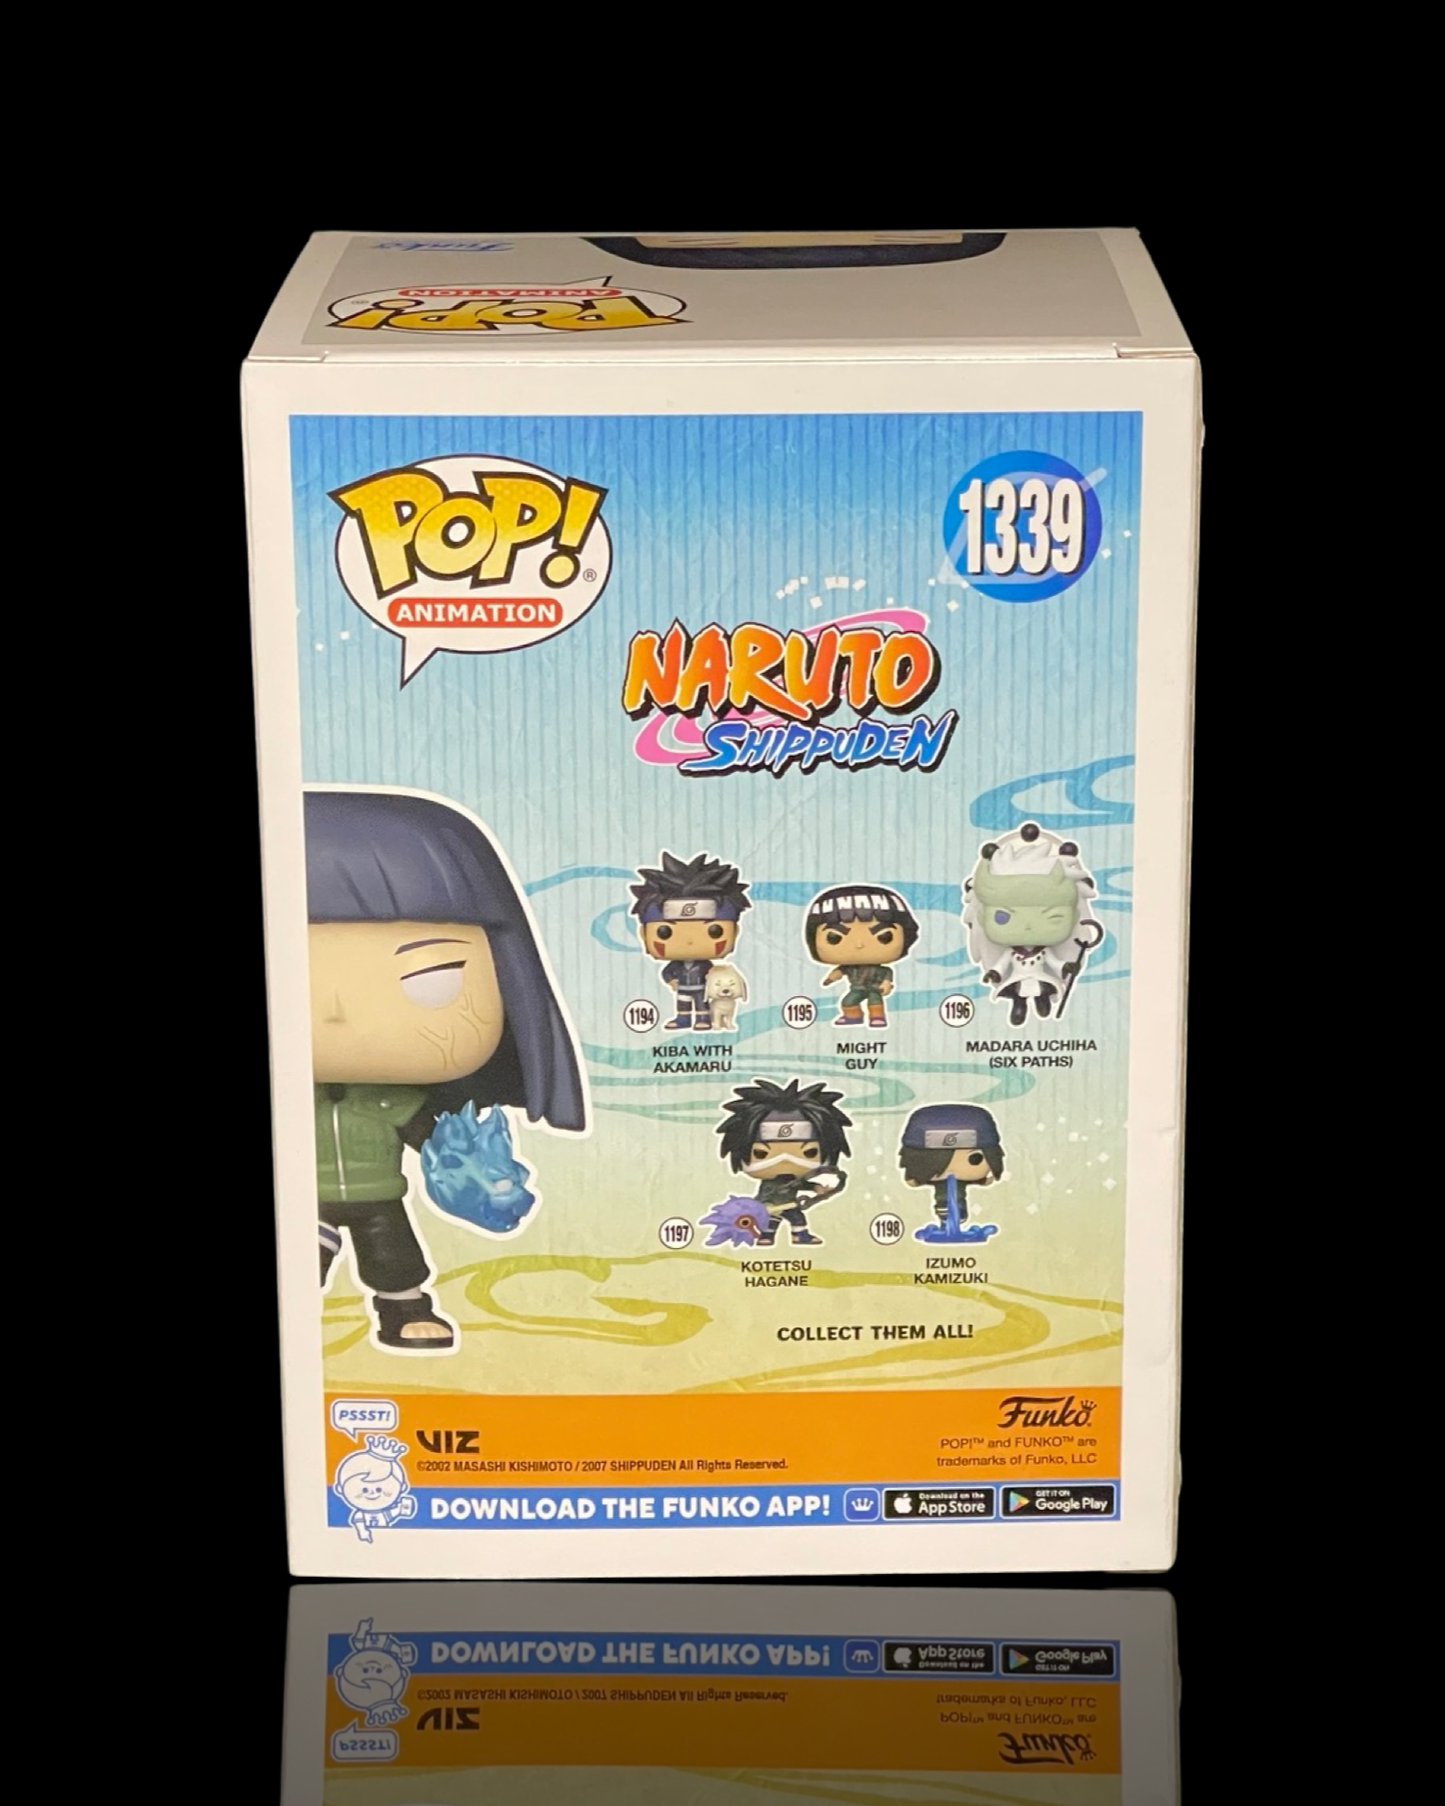 Naruto Shippuden: Hinata with Twin Lion Fists EE Exclusive